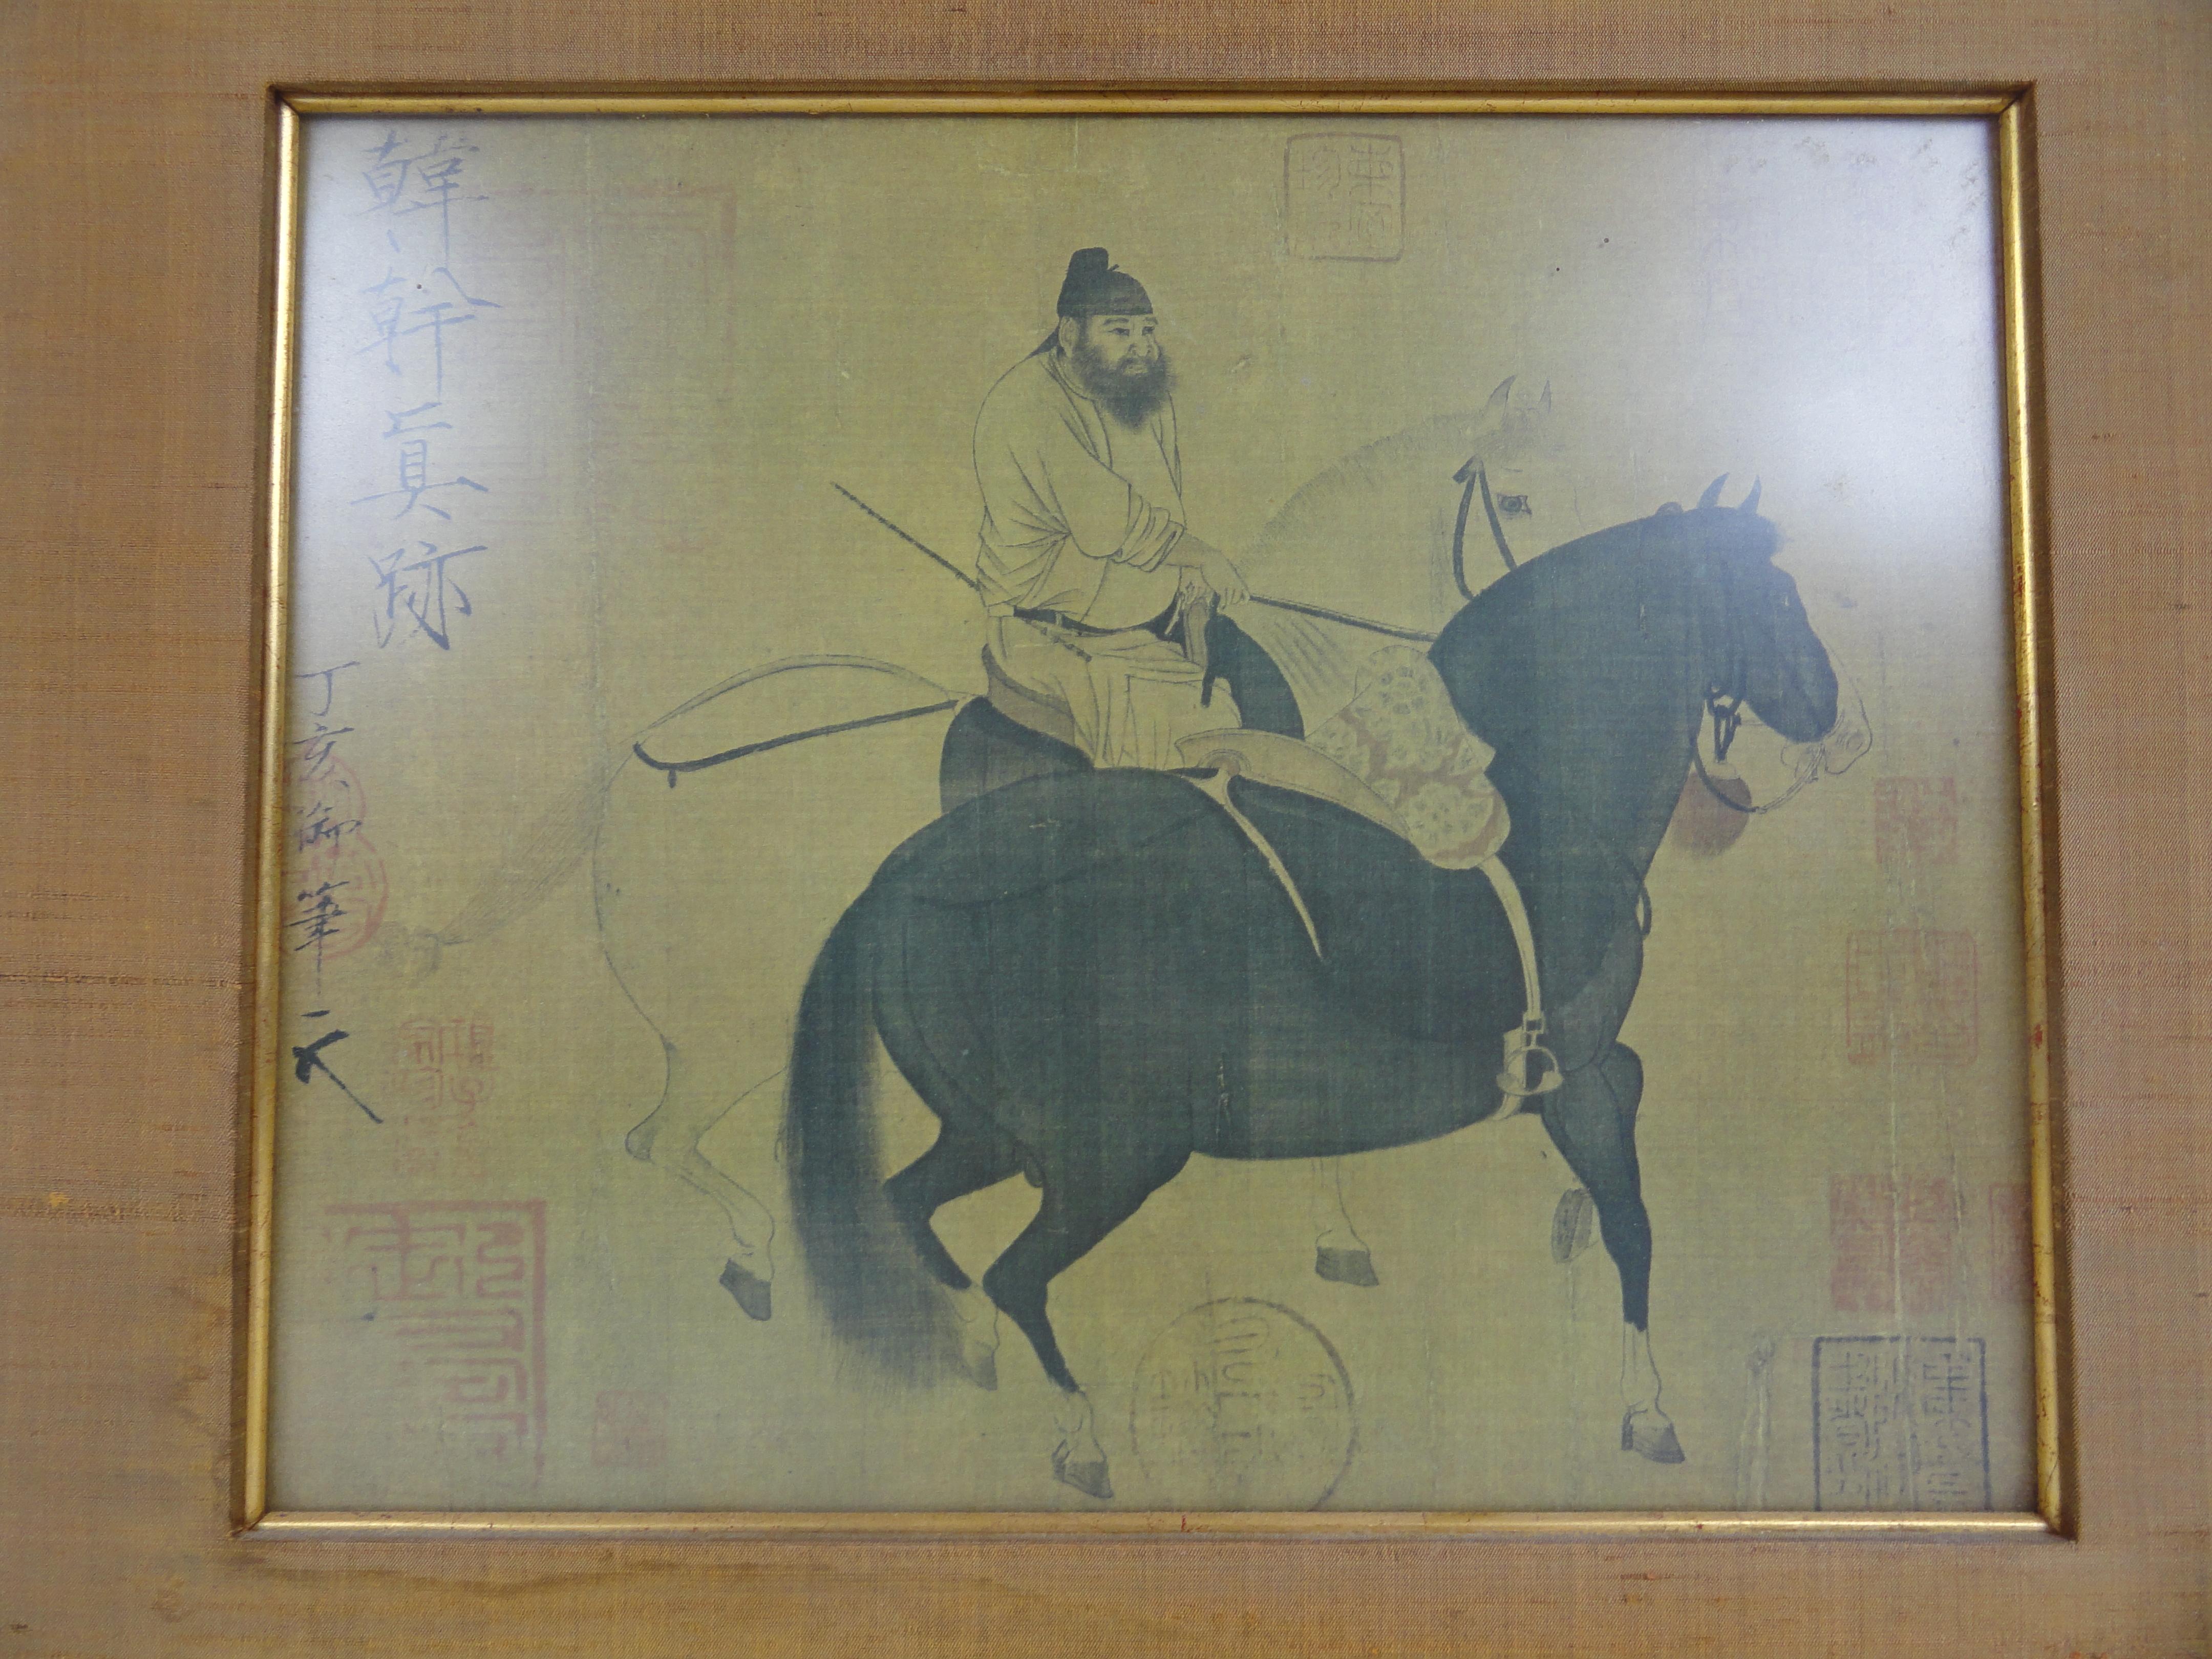 Late 19th century Japanese water color of a warrior on horseback.
Silk wrapped frame.